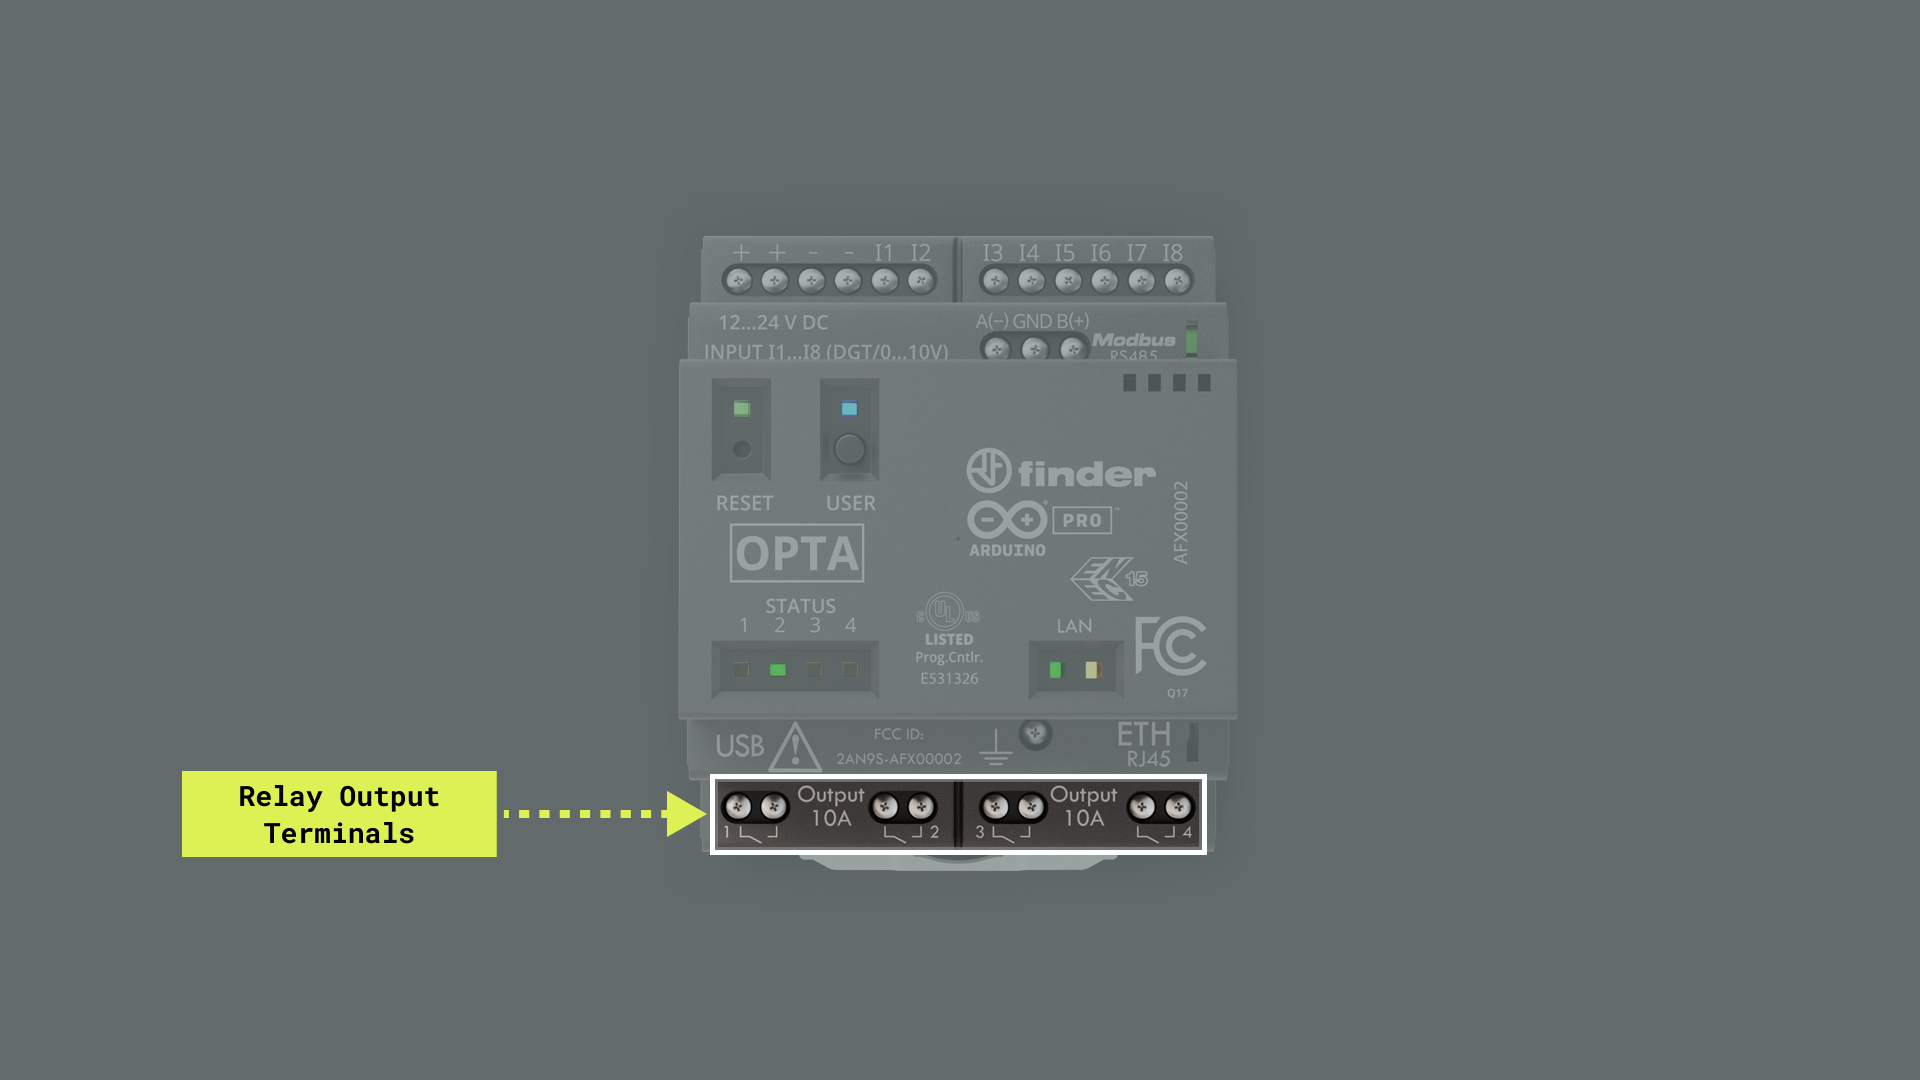 Output relays in Opta™ devices